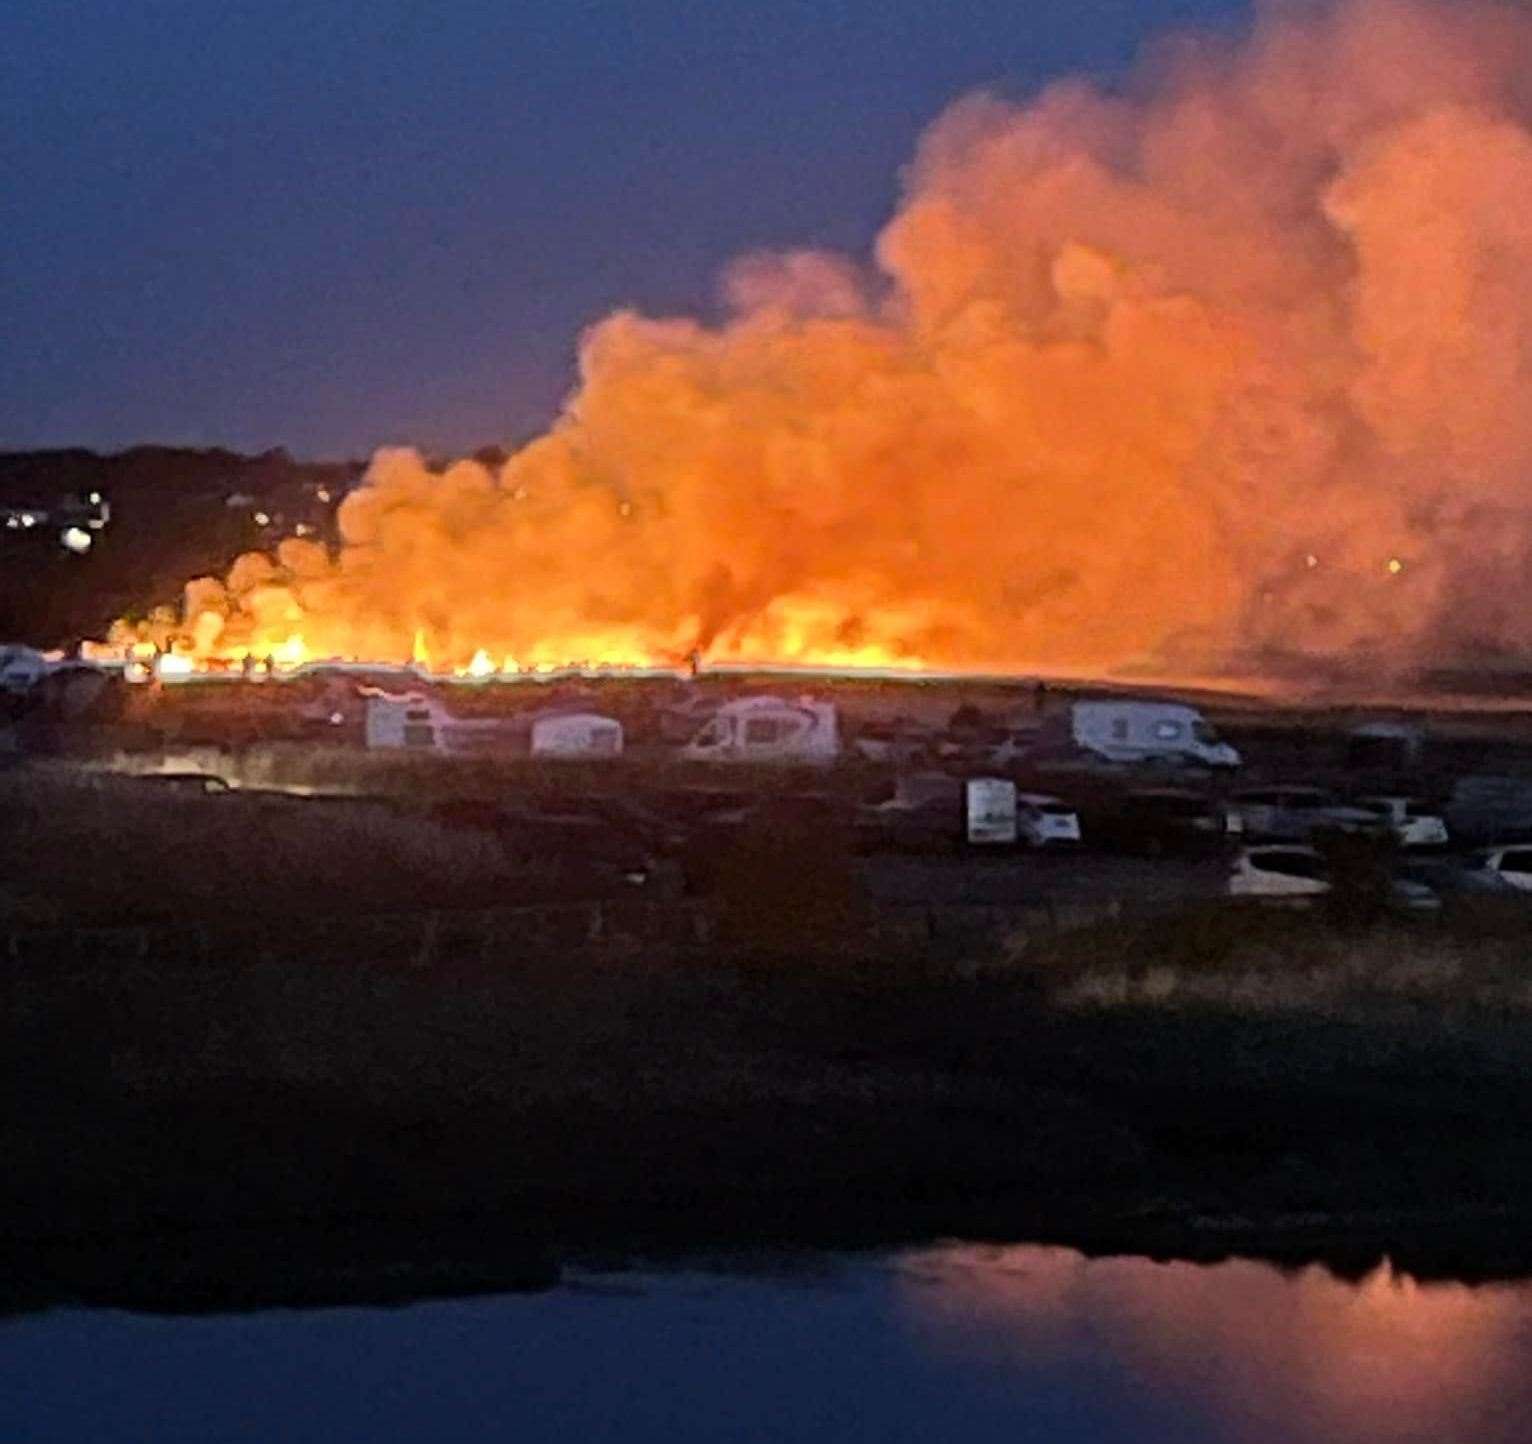 Fire and smoke billow from a huge grass fire at Barton's Point Coastal Park, Sheerness, Sheppey, on Saturday night. It is believed it was started by sparks from a model aeroplane fireworks display. Picture: Andy Gray (Facebook)